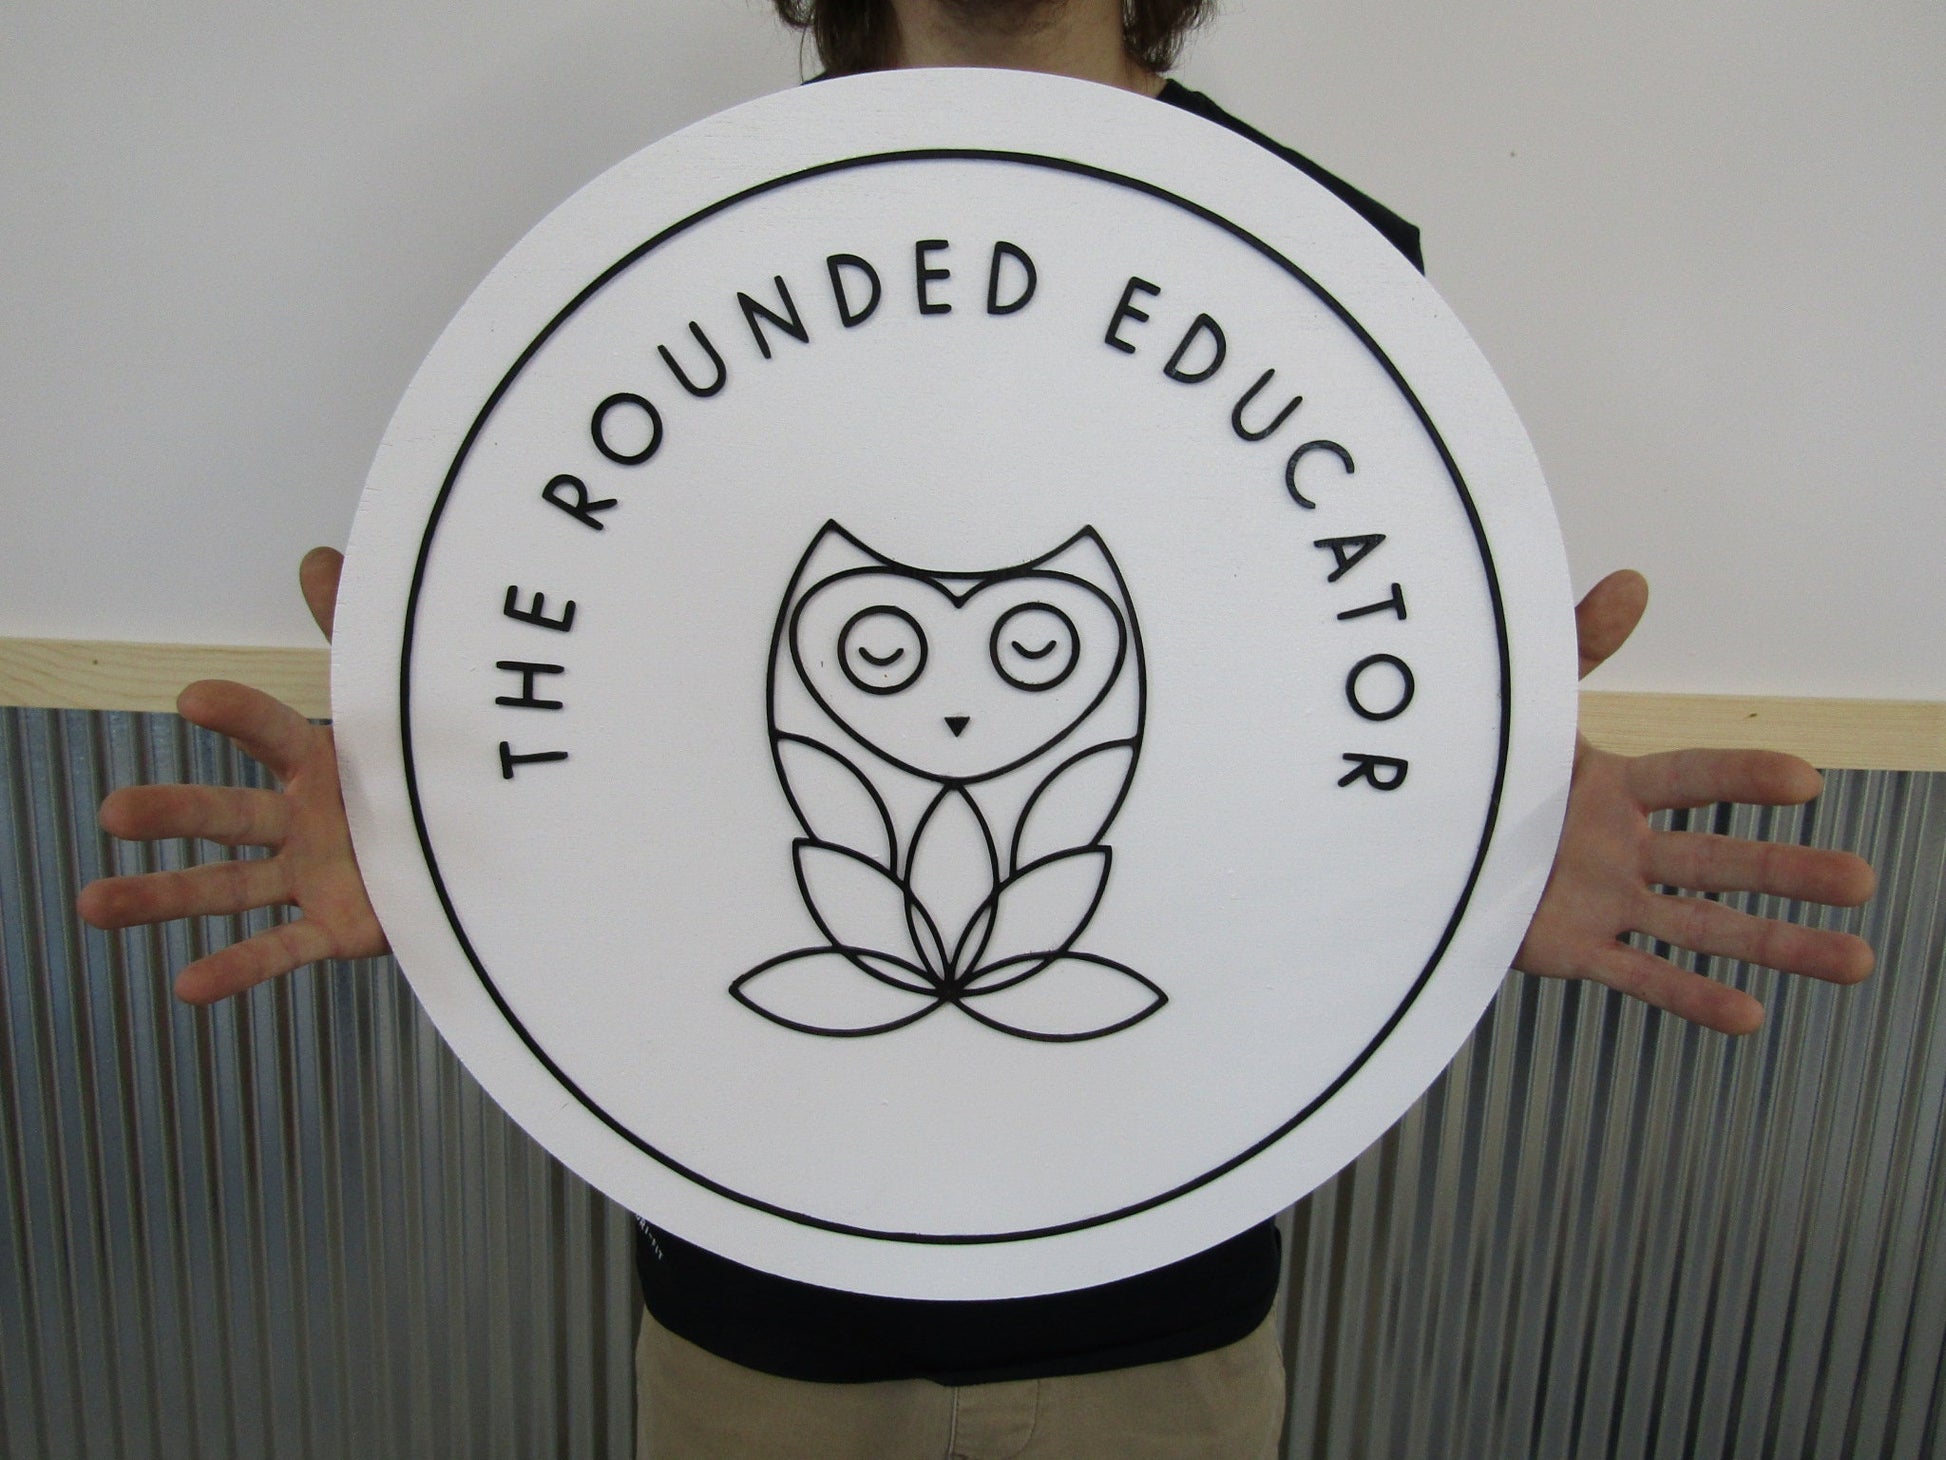 Custom Sign Round Commerical Signage Minimalist Made to Order Rounded Educator Owl Store Front Small Shop Logo School Circle Wooden Handmade